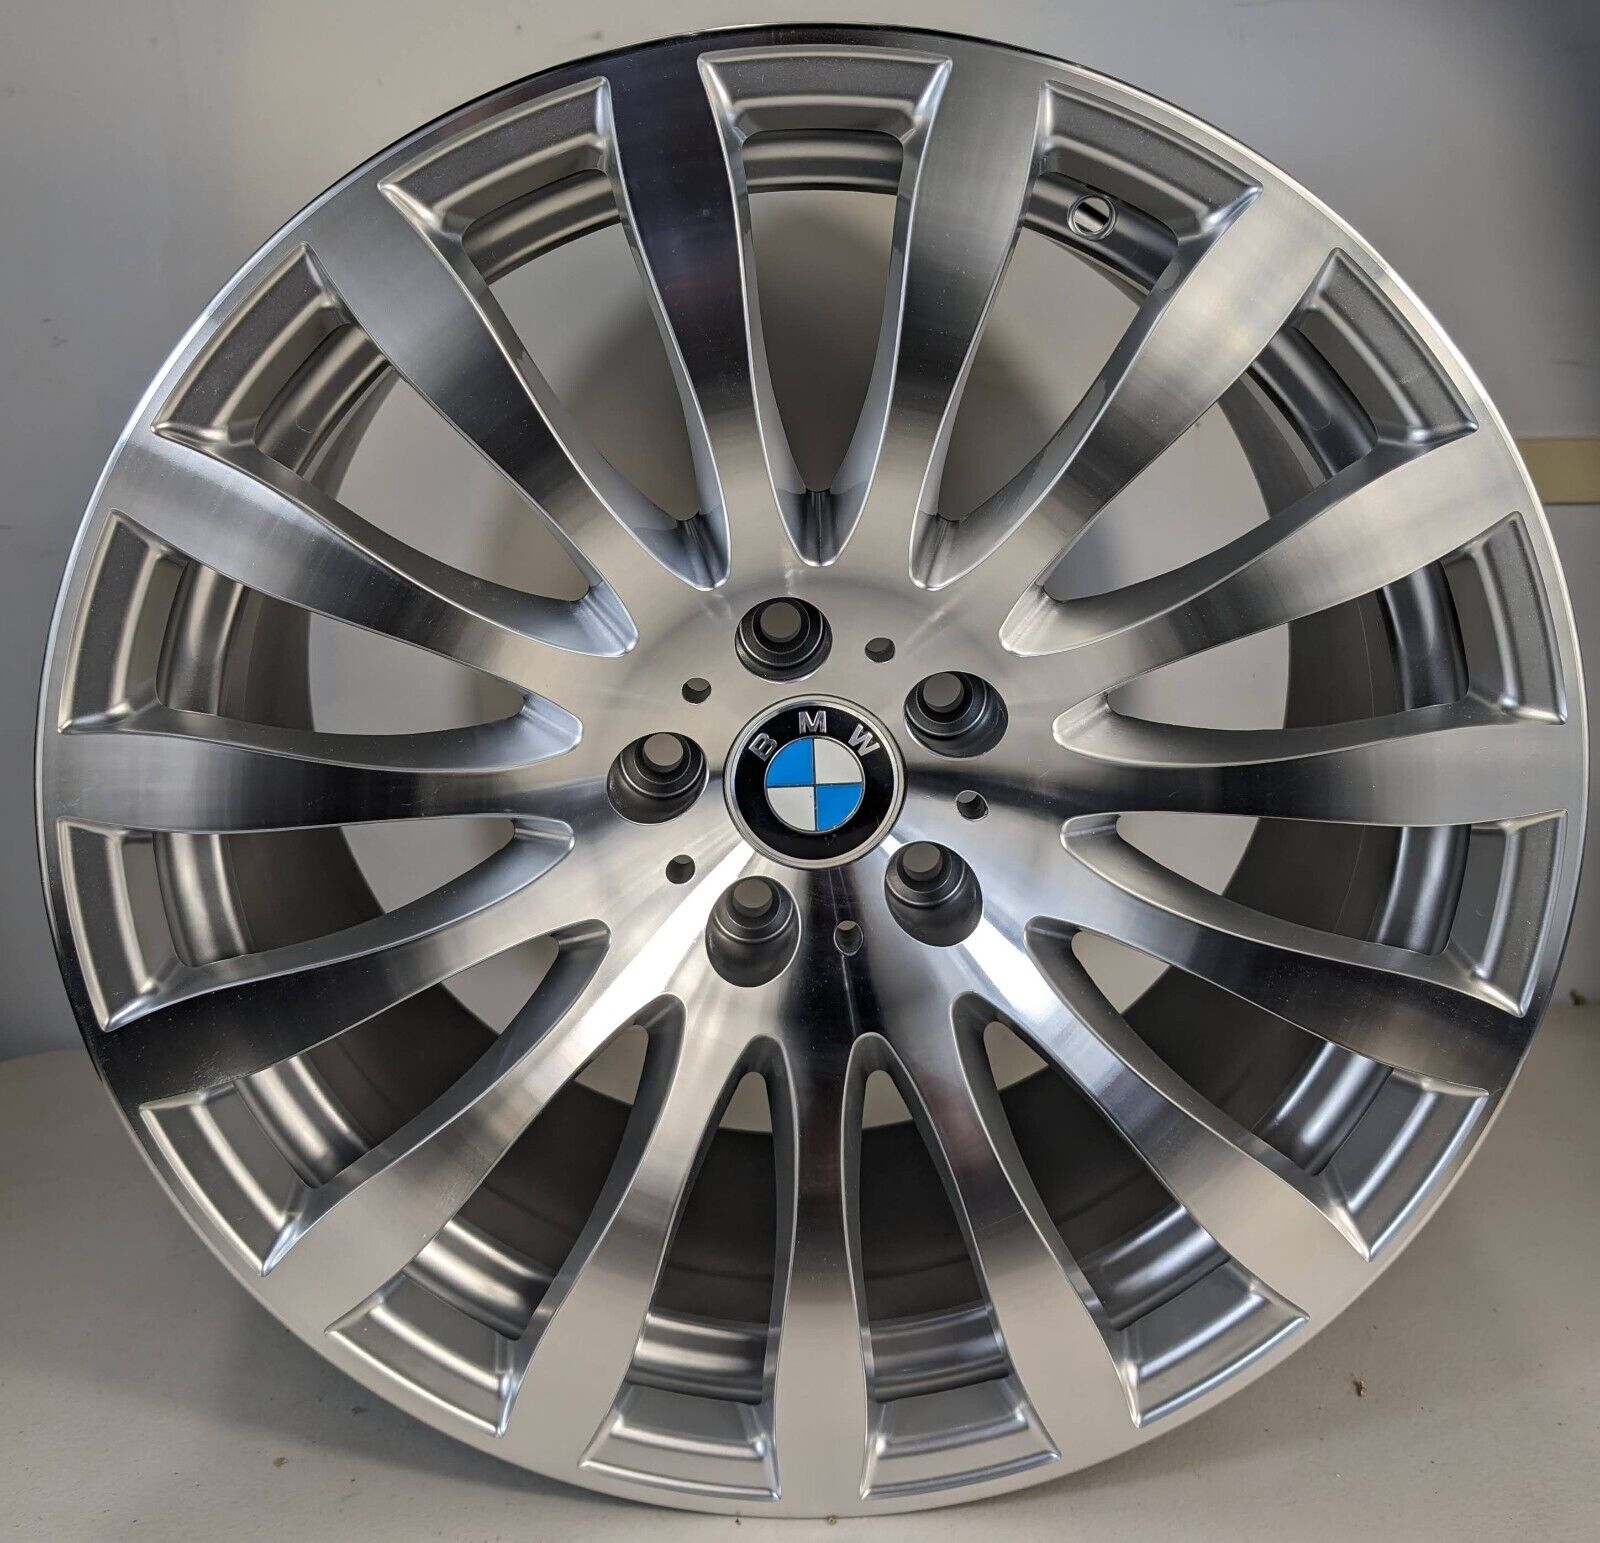 19 x 8.5 / 19 x 9.5 Wheels Rims Fit BMW 5-120 Staggered Concave Machine Polished